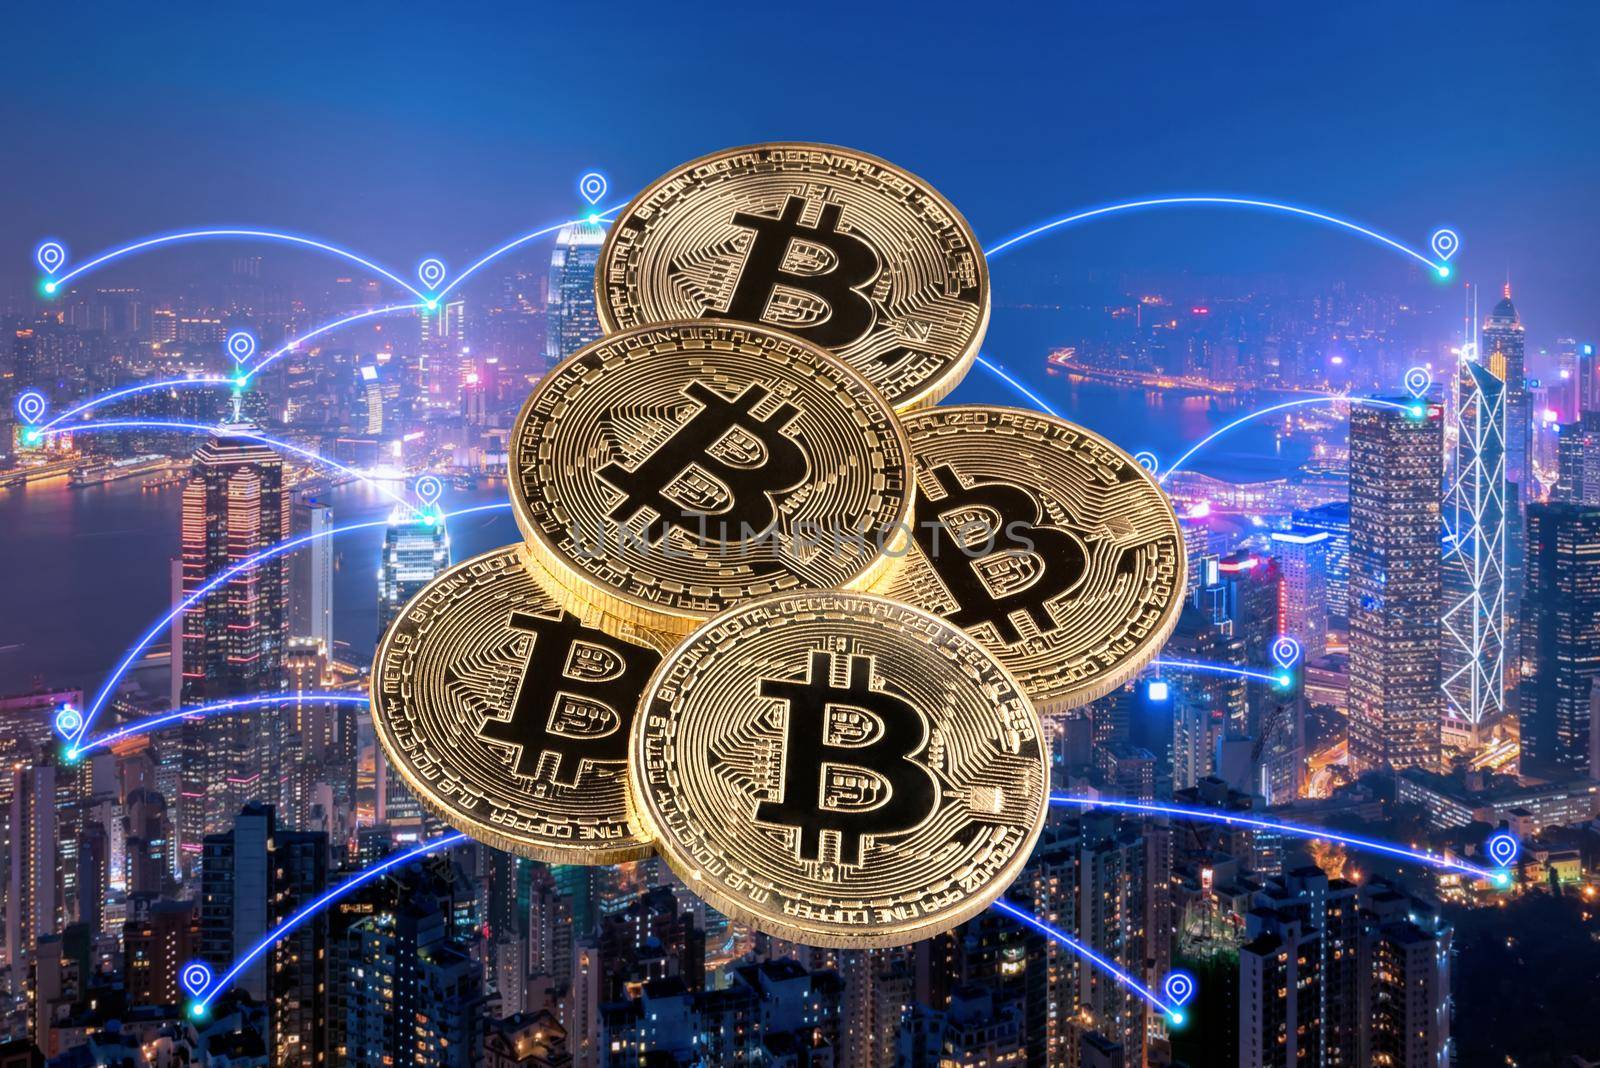 Bitcoin trading with smart city communication network and internet of things for Cryptocurrency and money investing concept.